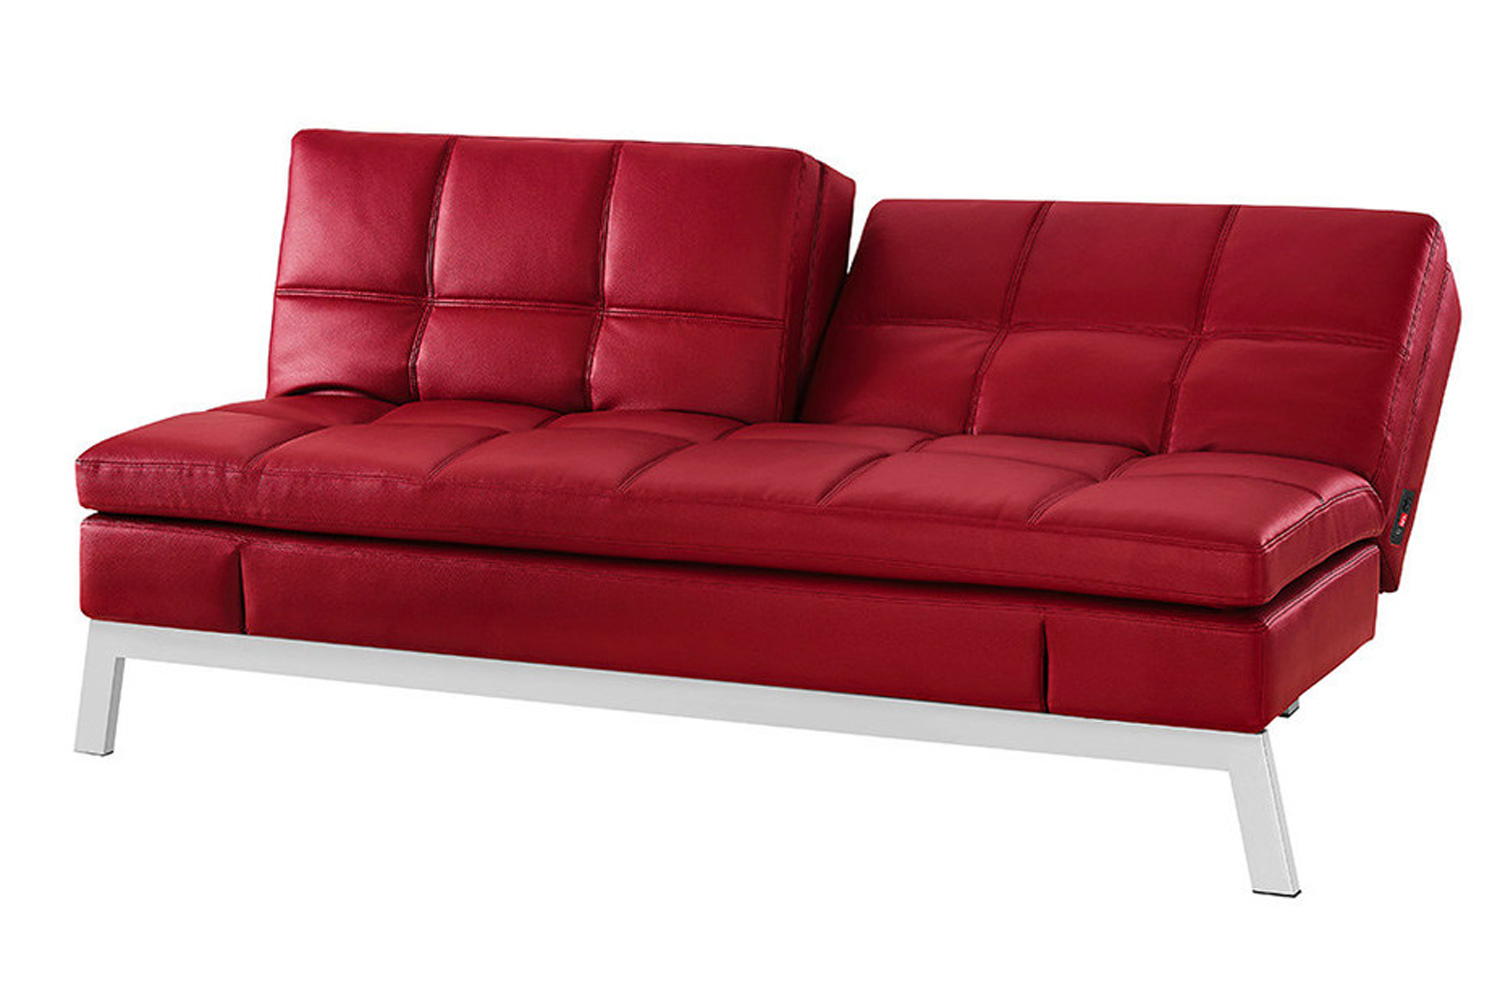 Gjemenis mid-century-modern-inspired couch has four USB ports and two 110-volt sockets as part of the furniture 